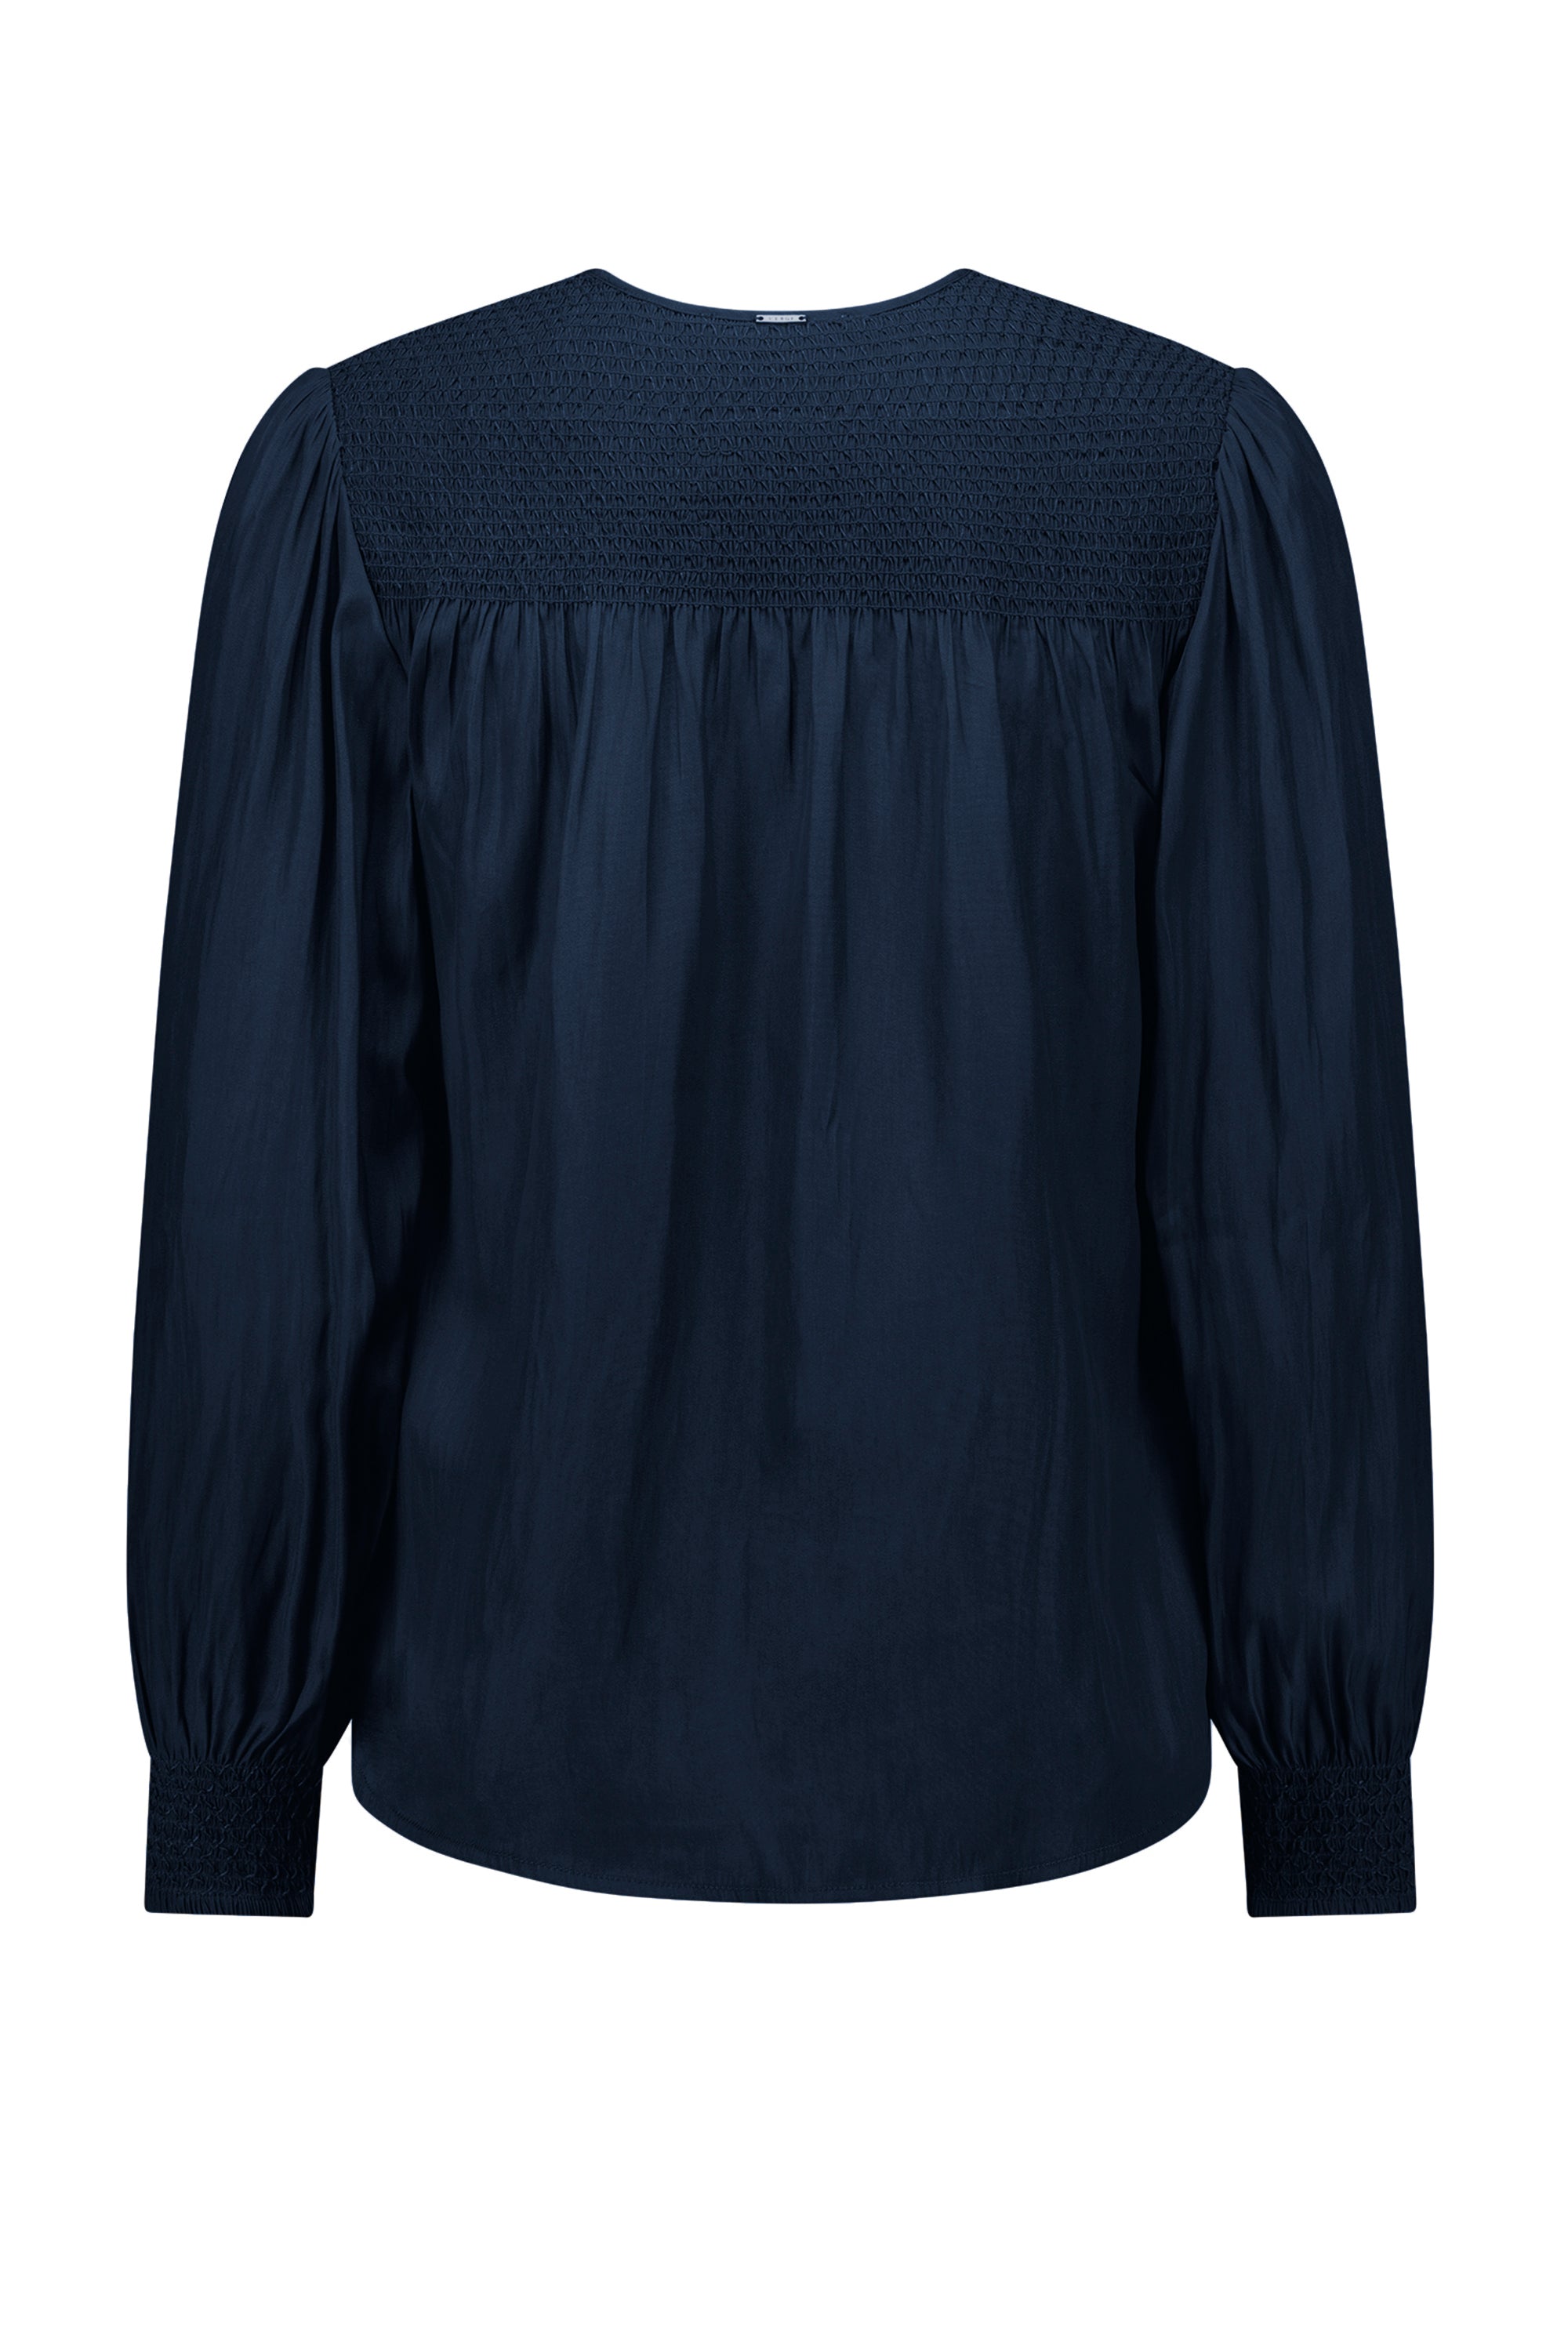 Tangled Blouse - Midnight